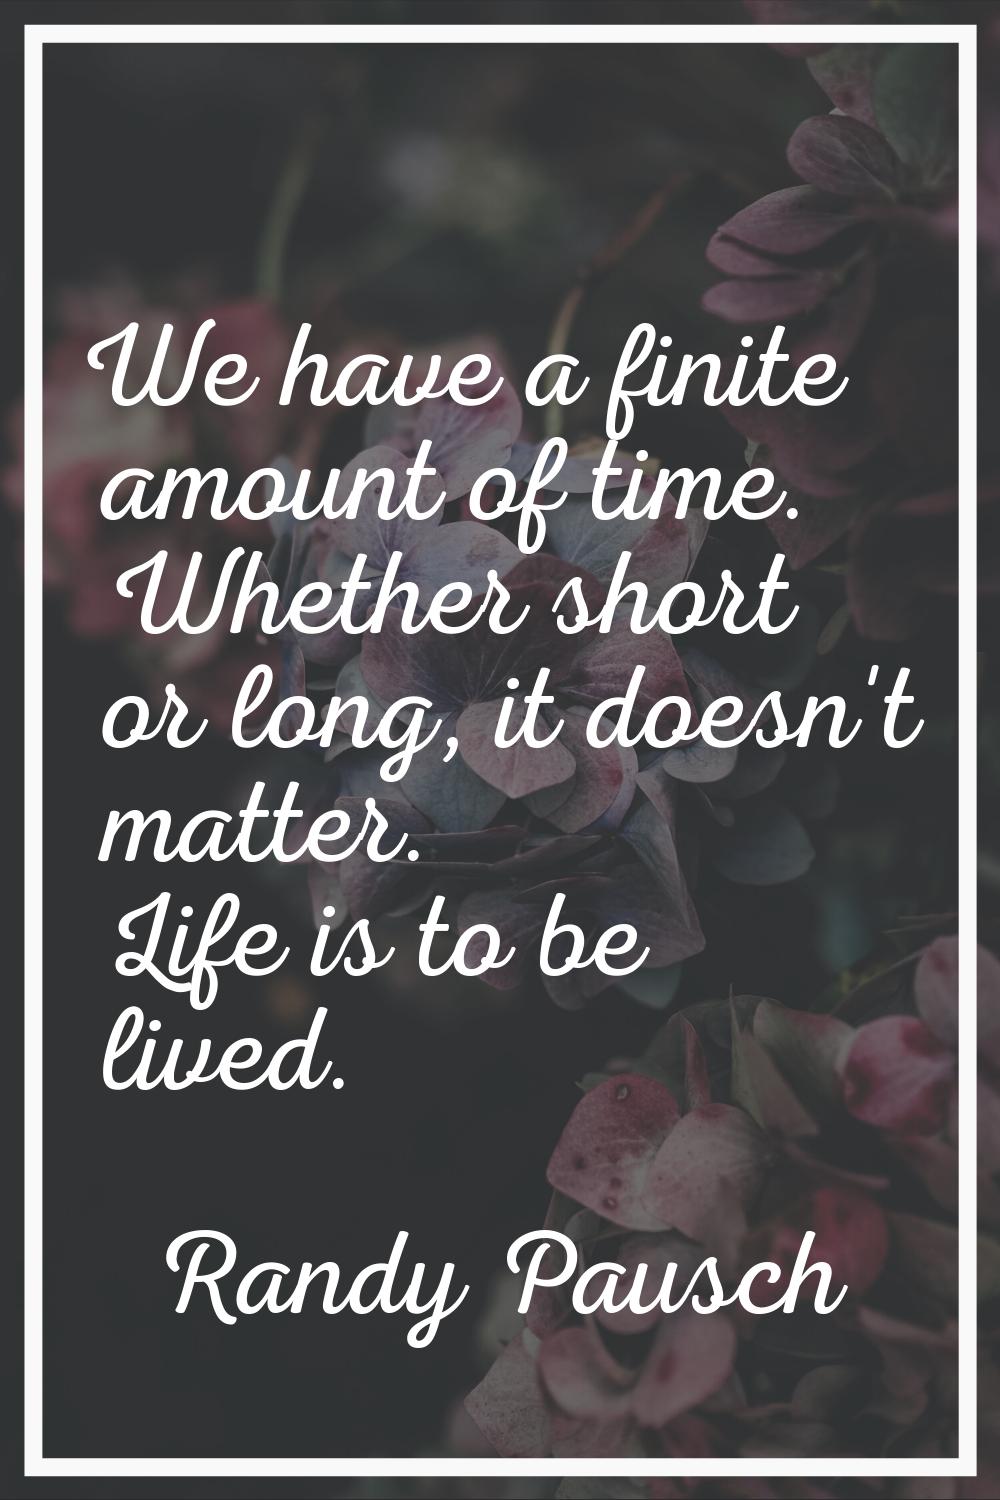 We have a finite amount of time. Whether short or long, it doesn't matter. Life is to be lived.